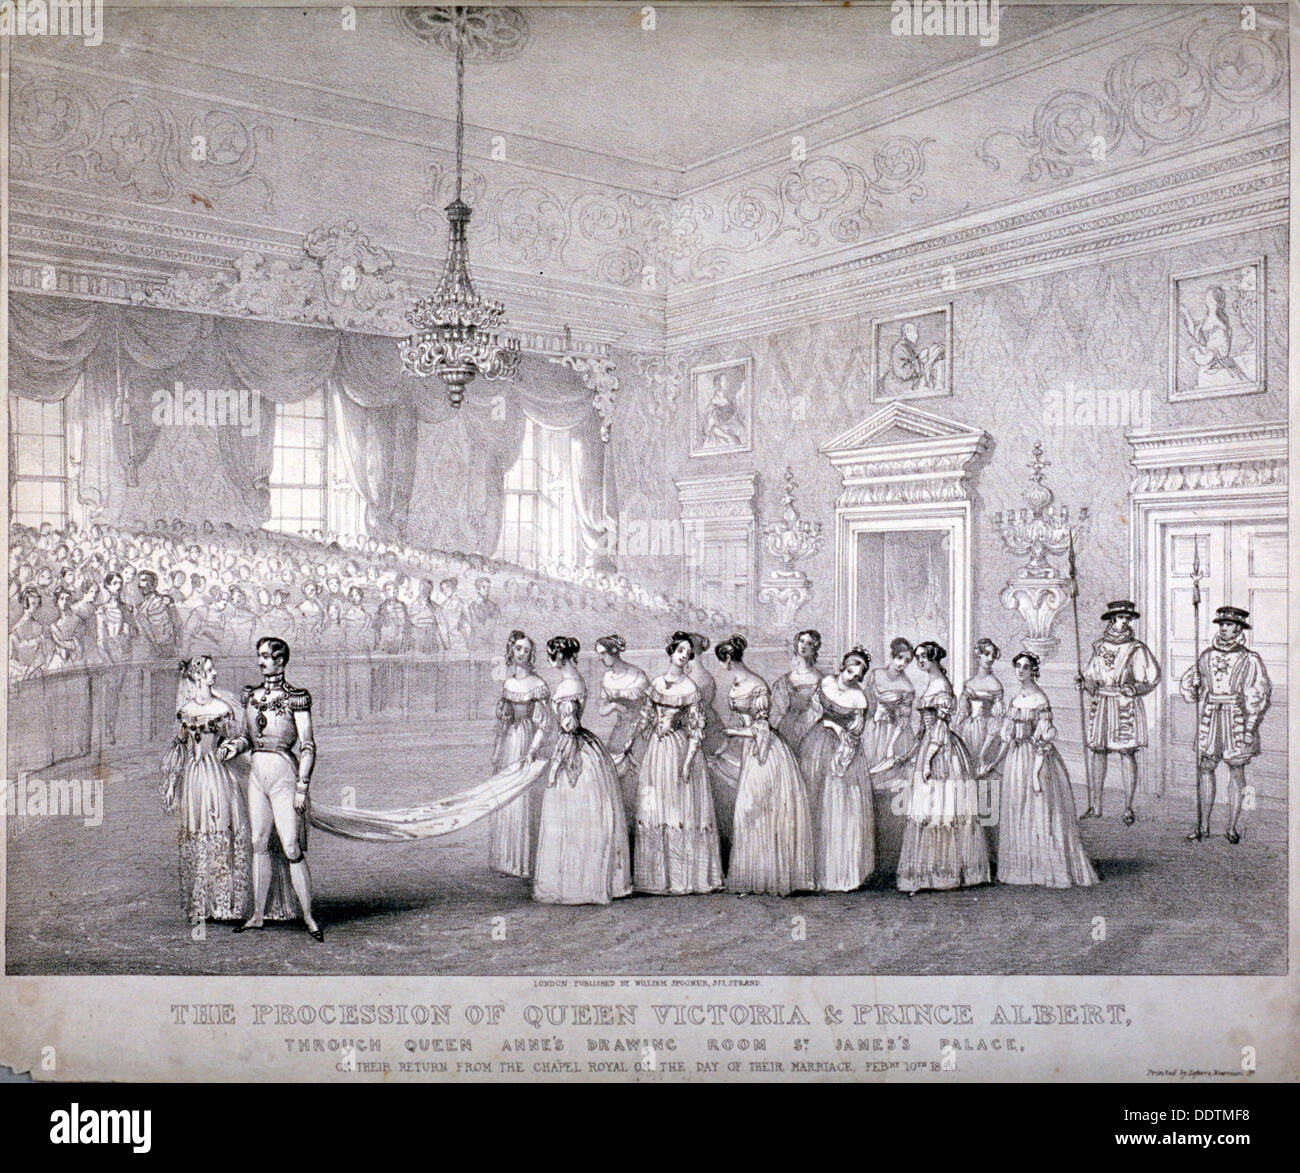 Wedding of Queen Victoria and Prince Albert, St James's Palace, Westminster, London, 1840. Artist: Louis Maria Lefevre Stock Photo